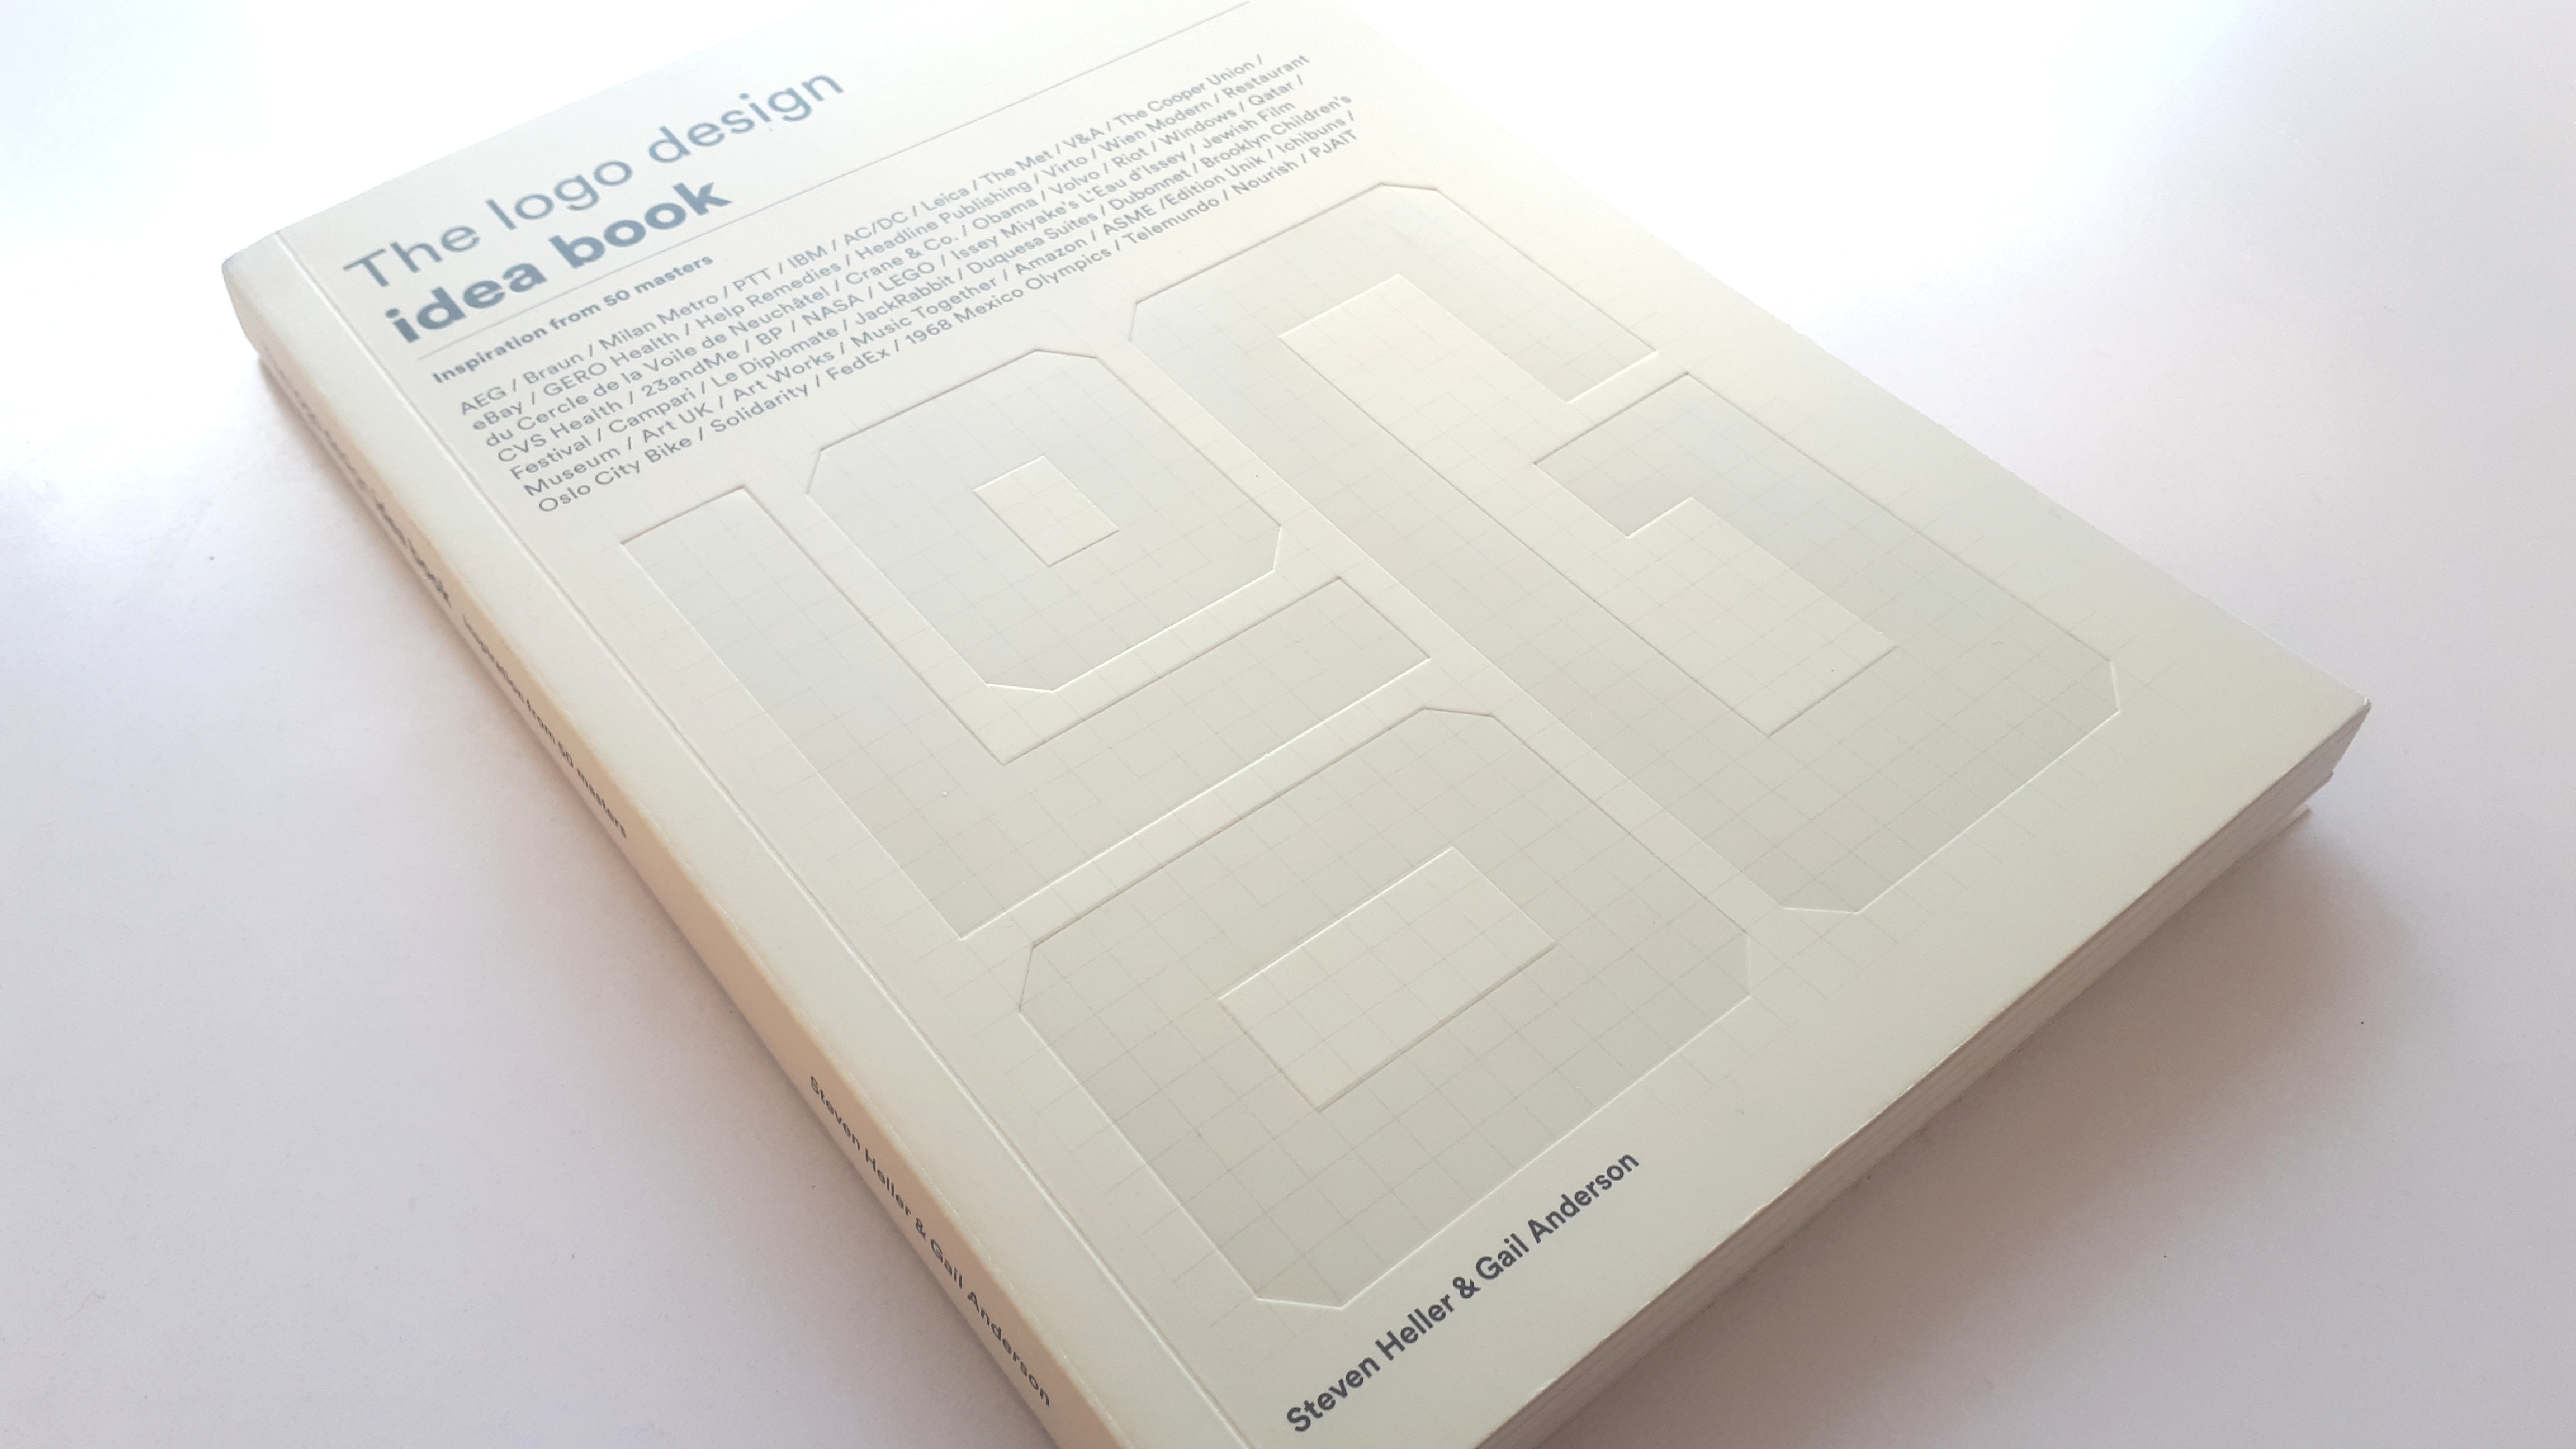 The Logo Design Idea Book by Steve Heller and Gail Anderson